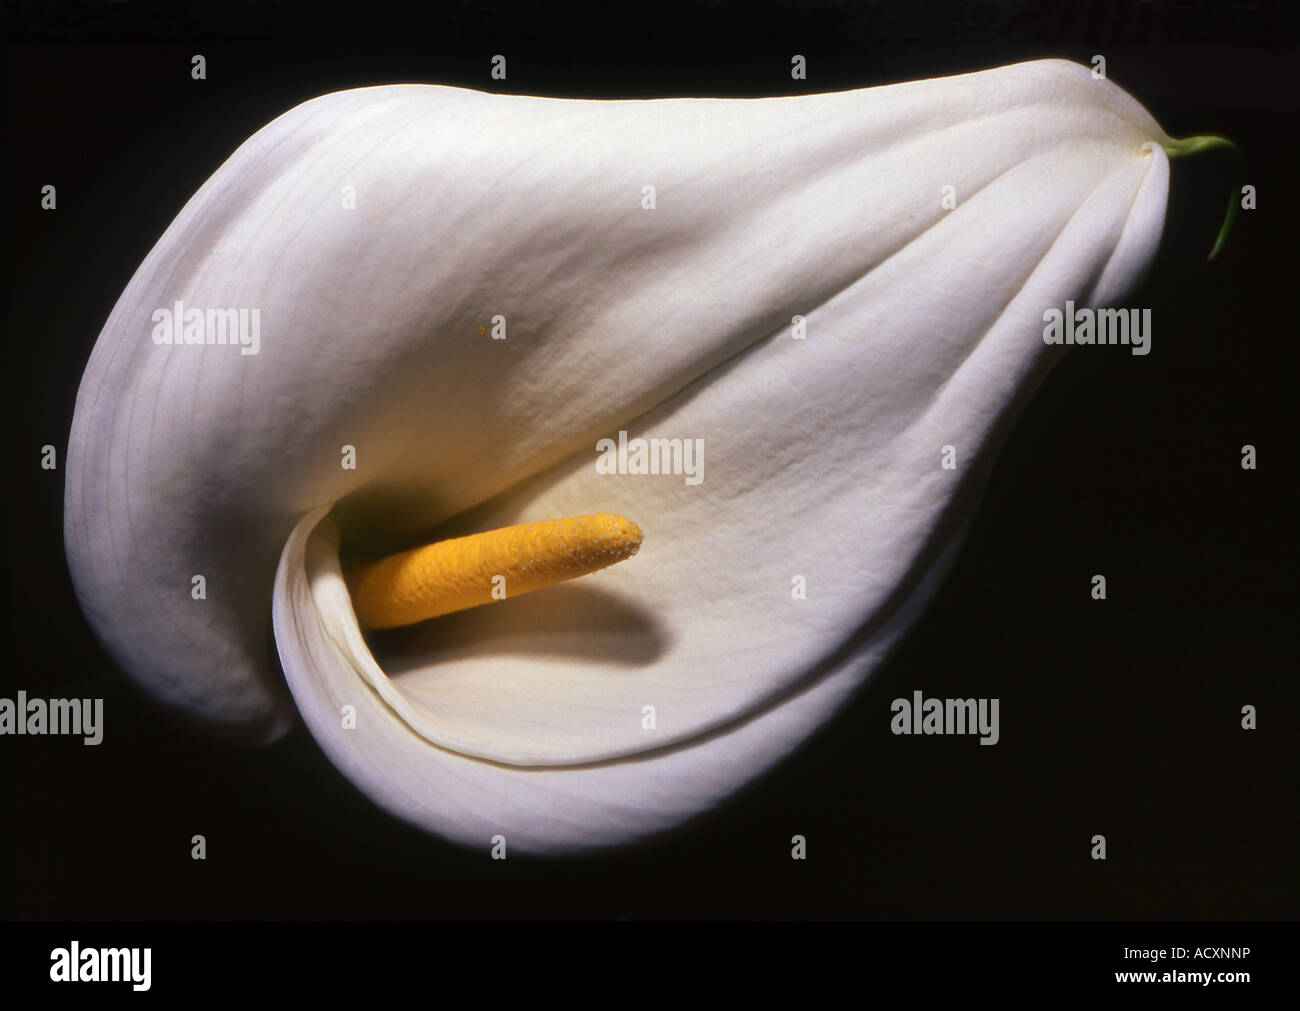 Front View Cala Lily on black background Stock Photo